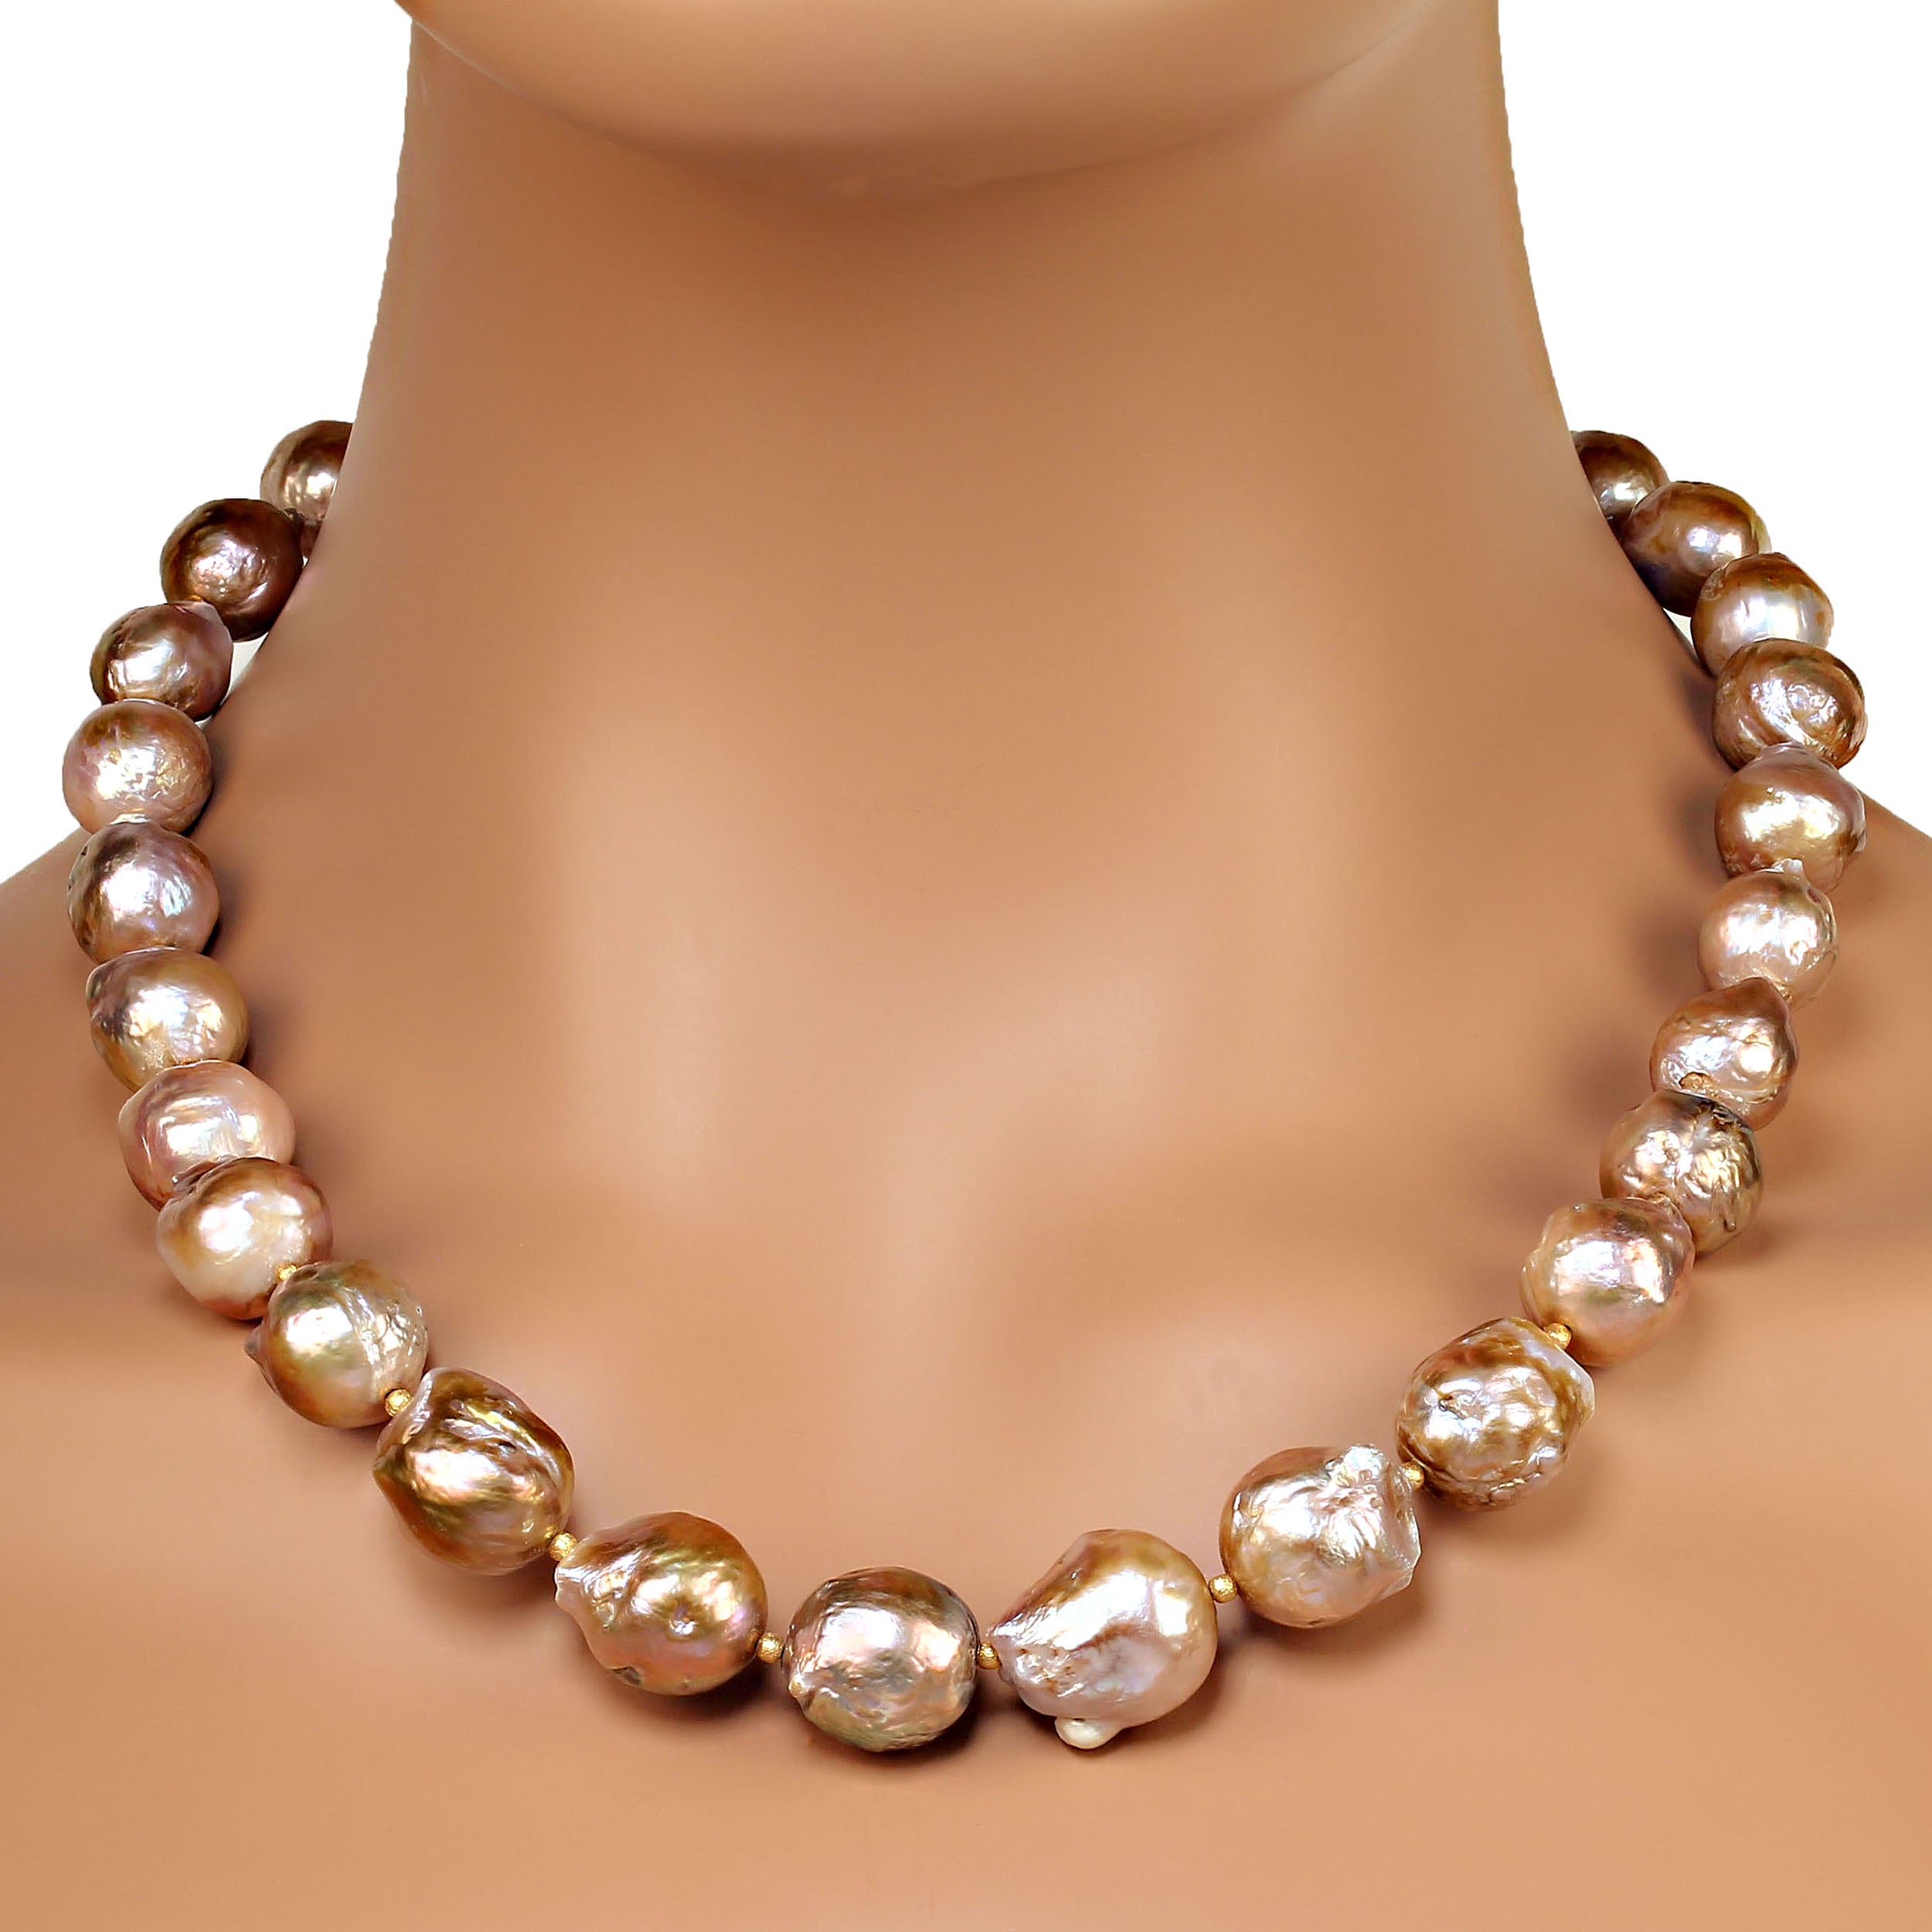 AJD 21 Inch Elegant Gold Baroque Pearl necklace with goldy accents Great Gift! For Sale